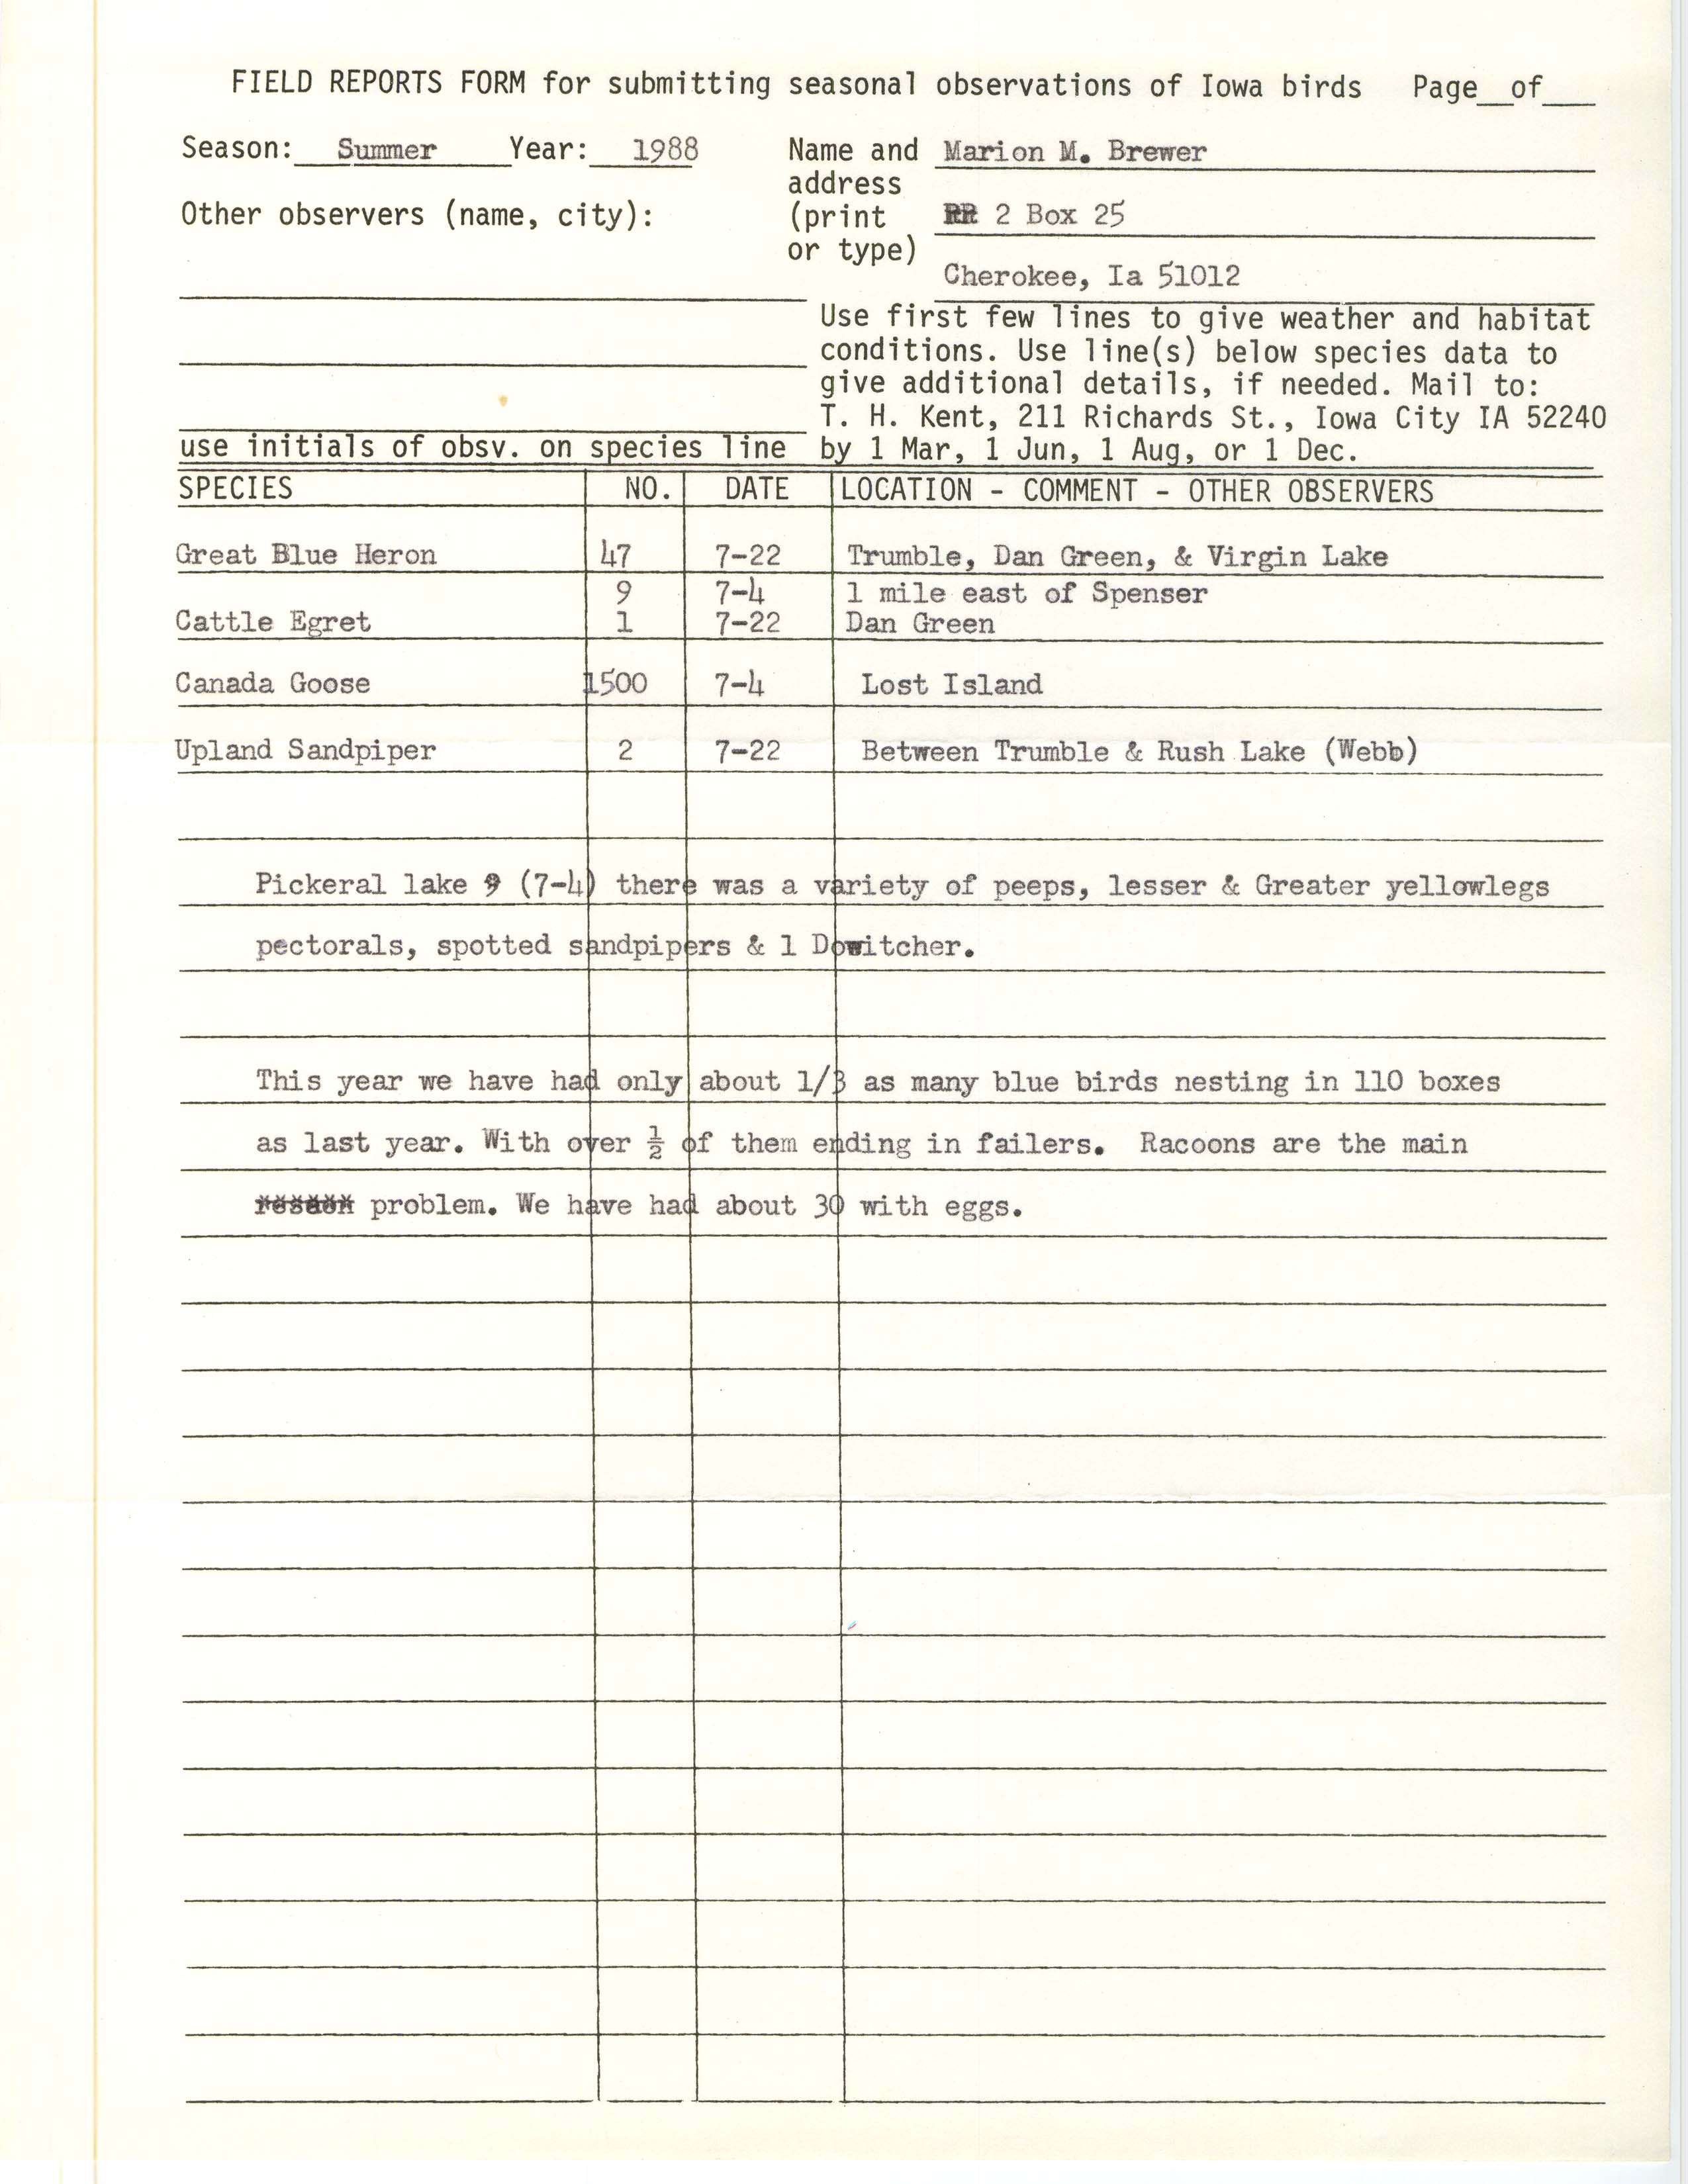 Field reports form for submitting seasonal observations of Iowa birds, Marion M. Brewer, summer 1988